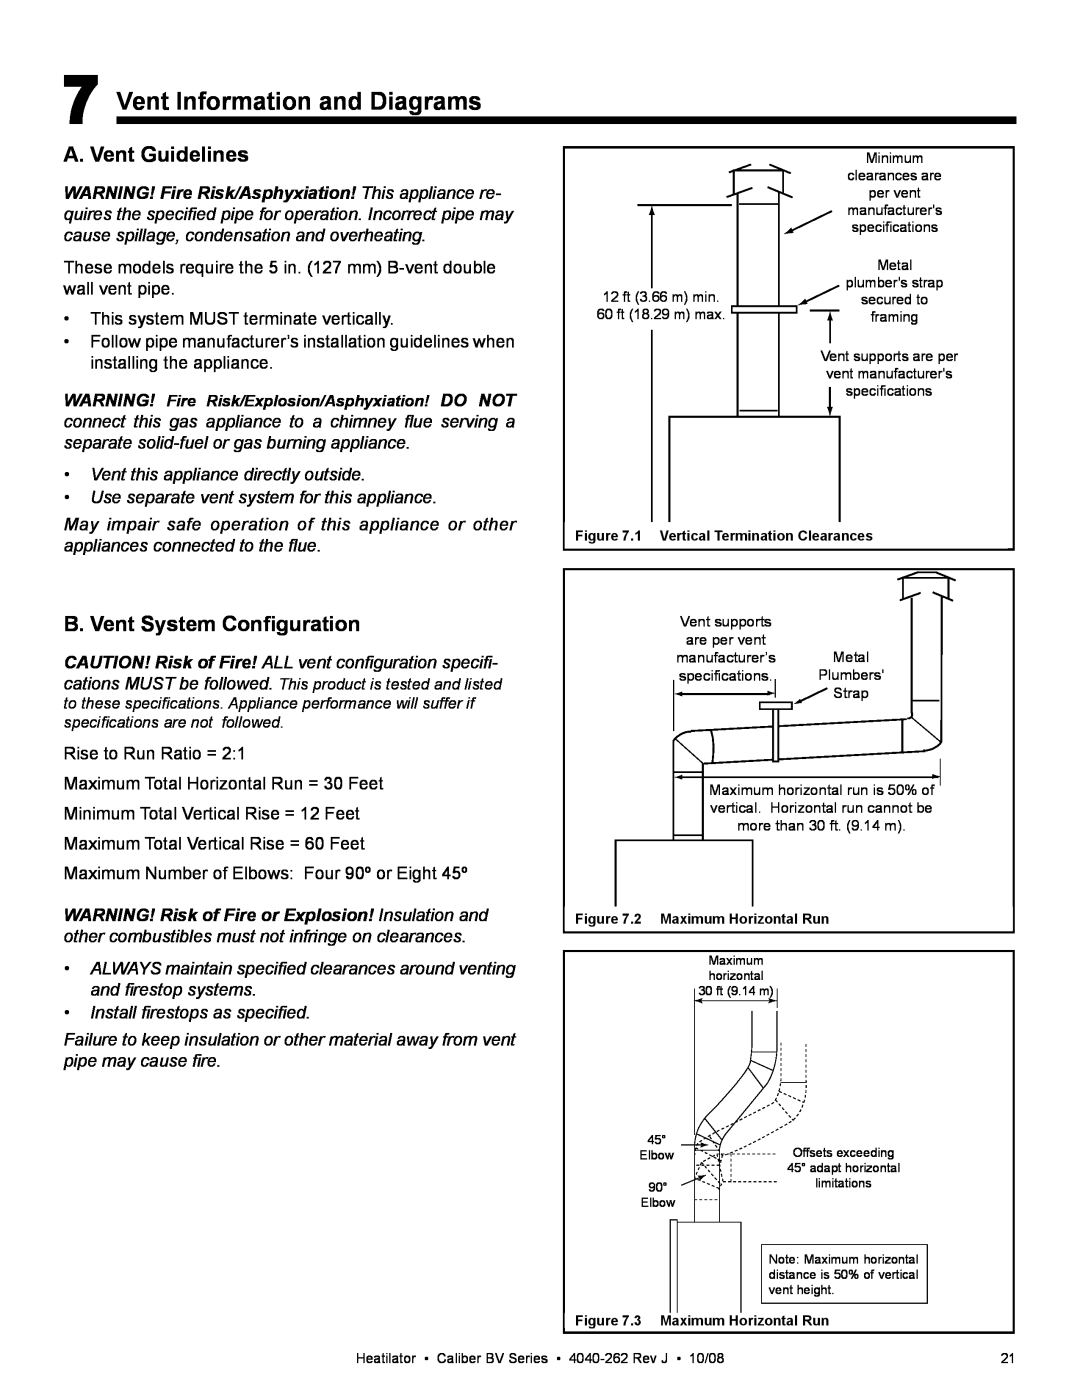 Hearth and Home Technologies CB4842IR Vent Information and Diagrams, A. Vent Guidelines, B. Vent System Conﬁguration 